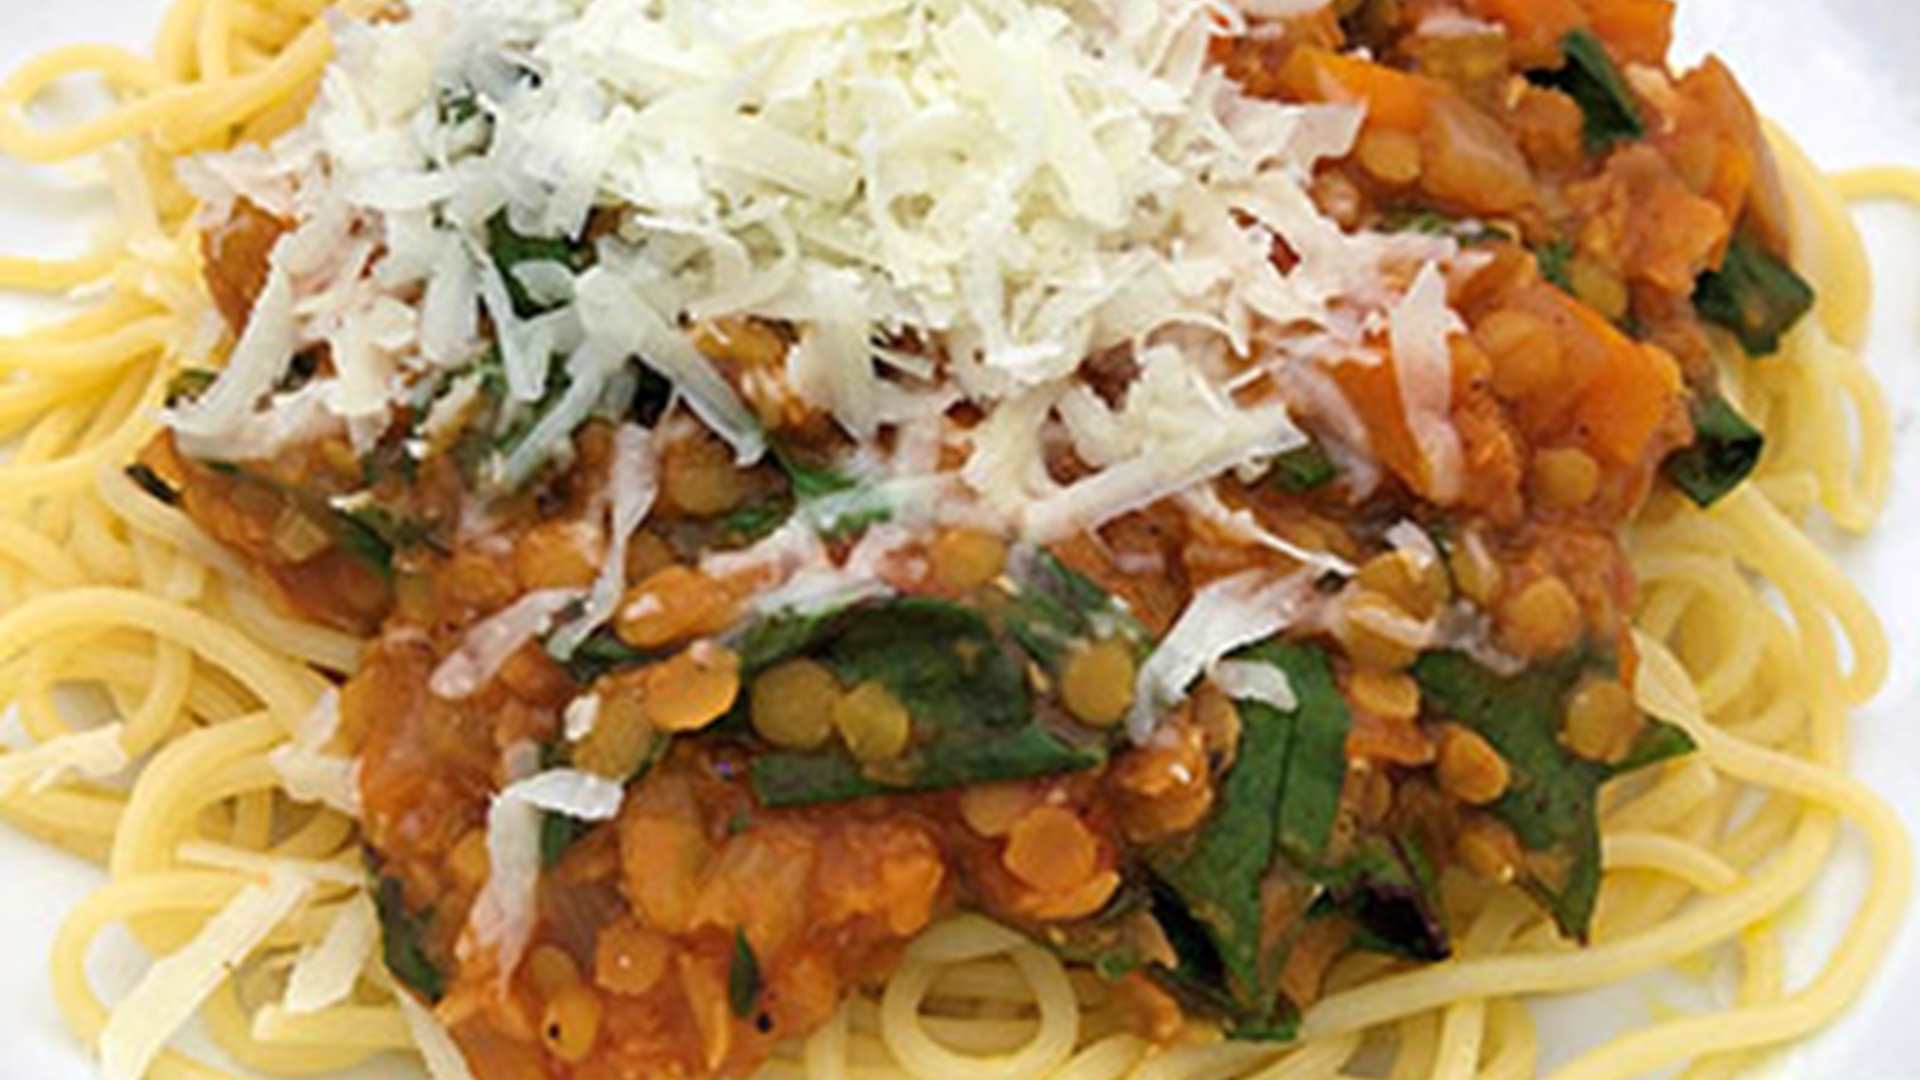 Carrot, Lentil And Spinach Ragu